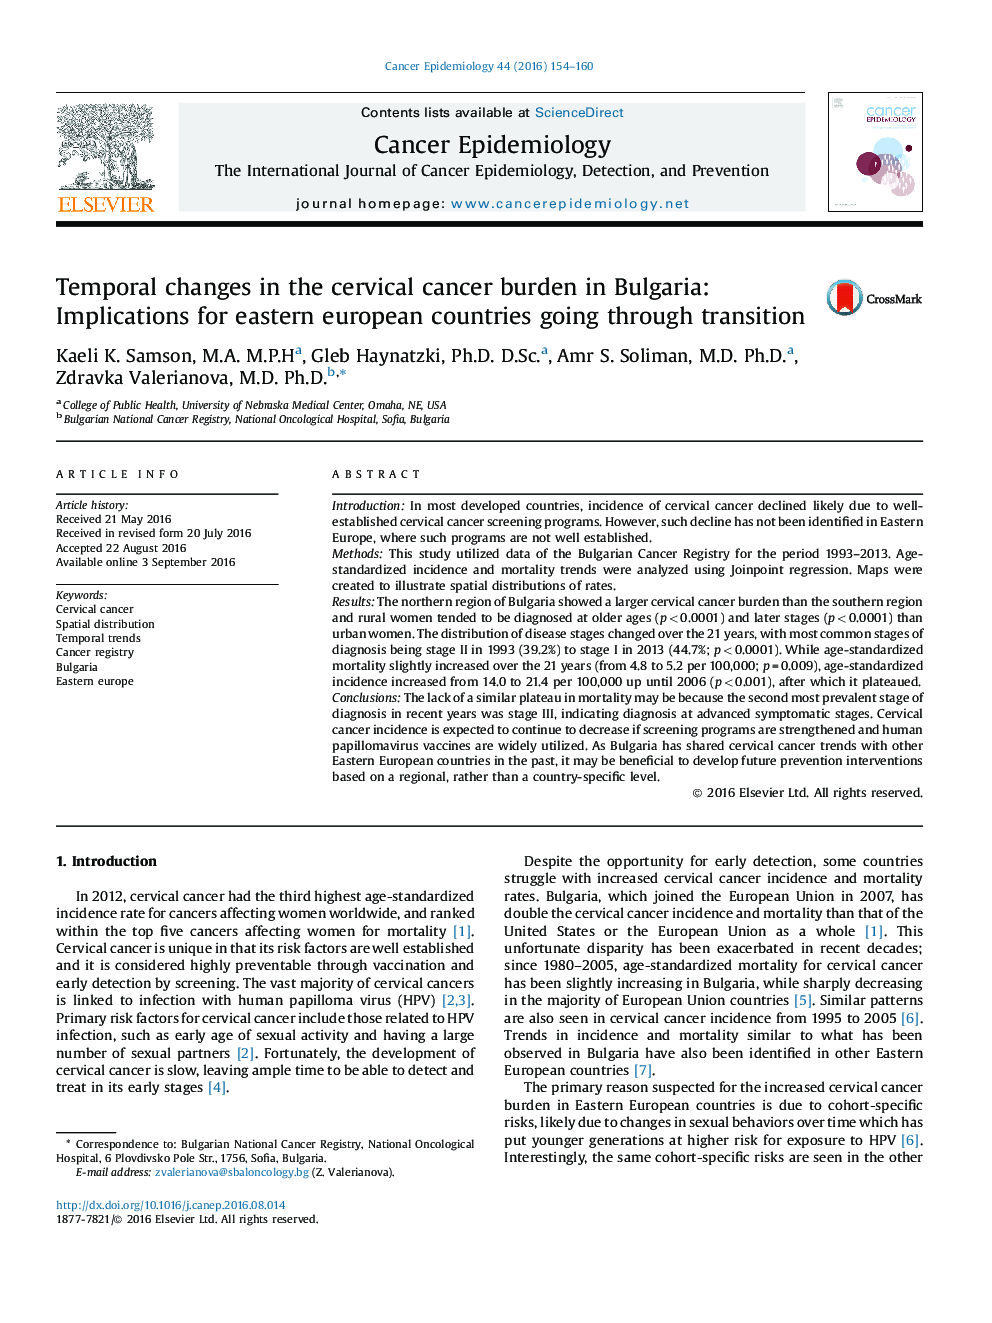 Temporal changes in the cervical cancer burden in Bulgaria: Implications for eastern european countries going through transition